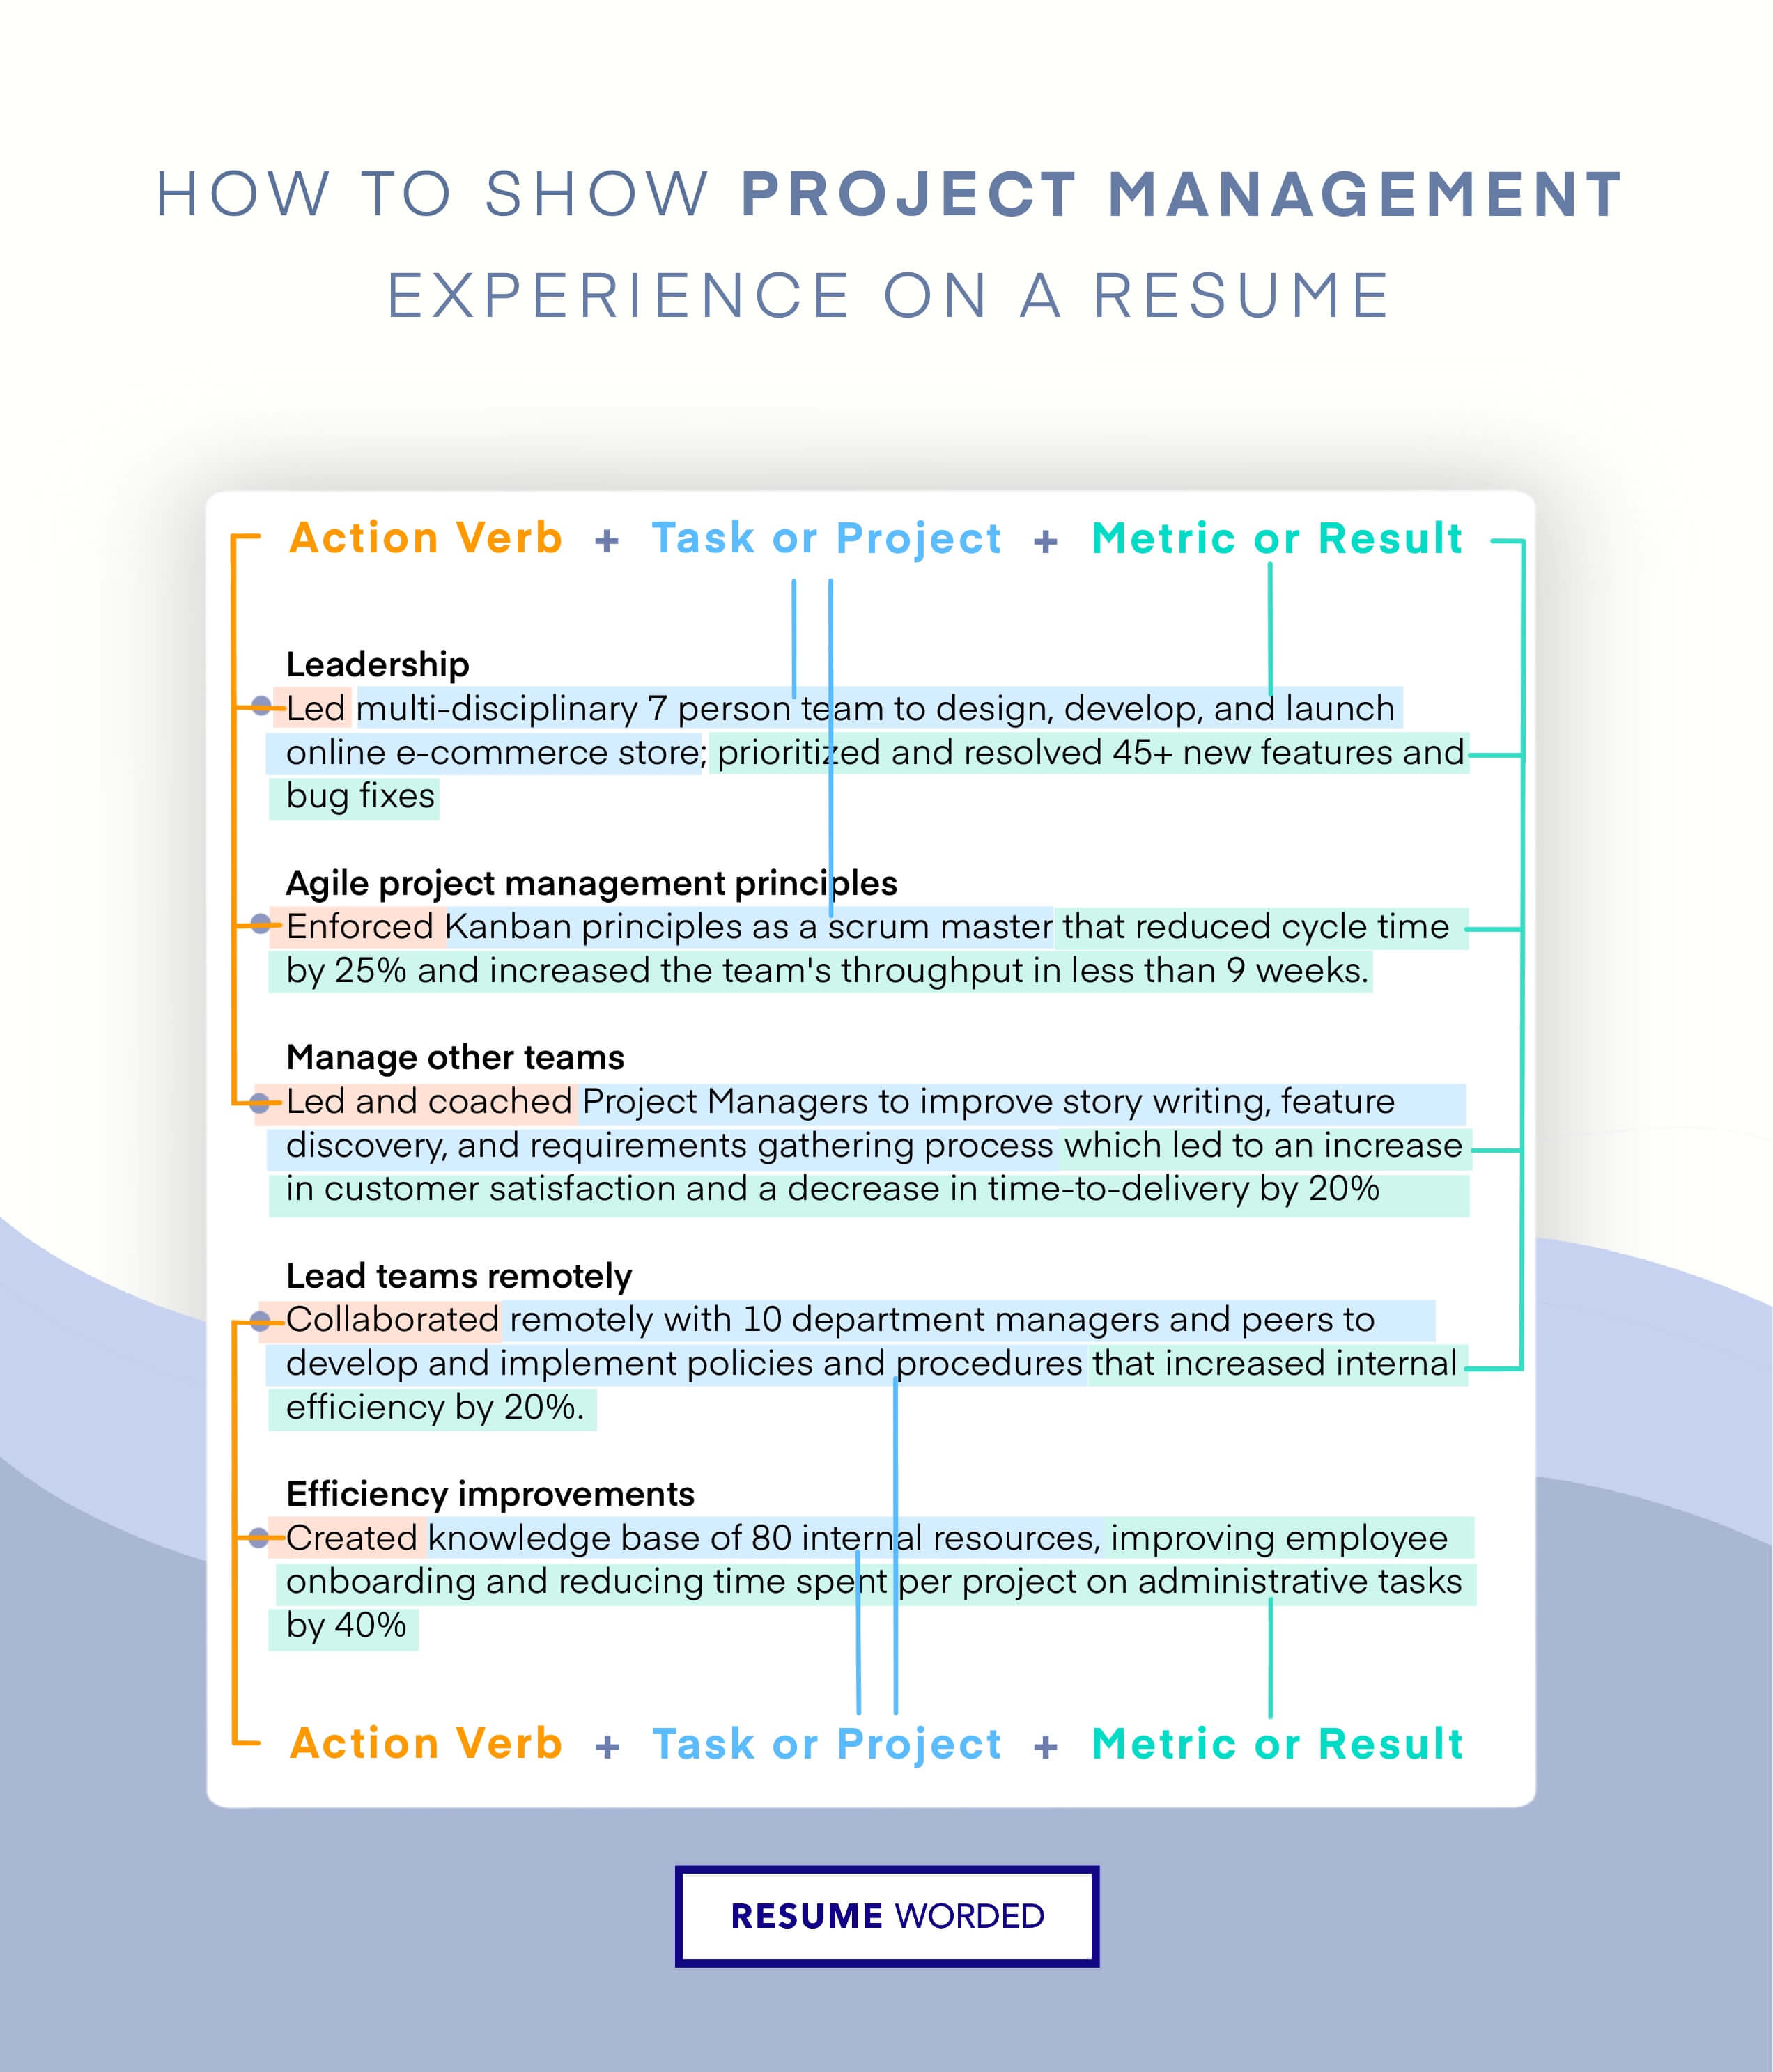 Highlight your project management knowledge and skills - Director of Customer Service Resume